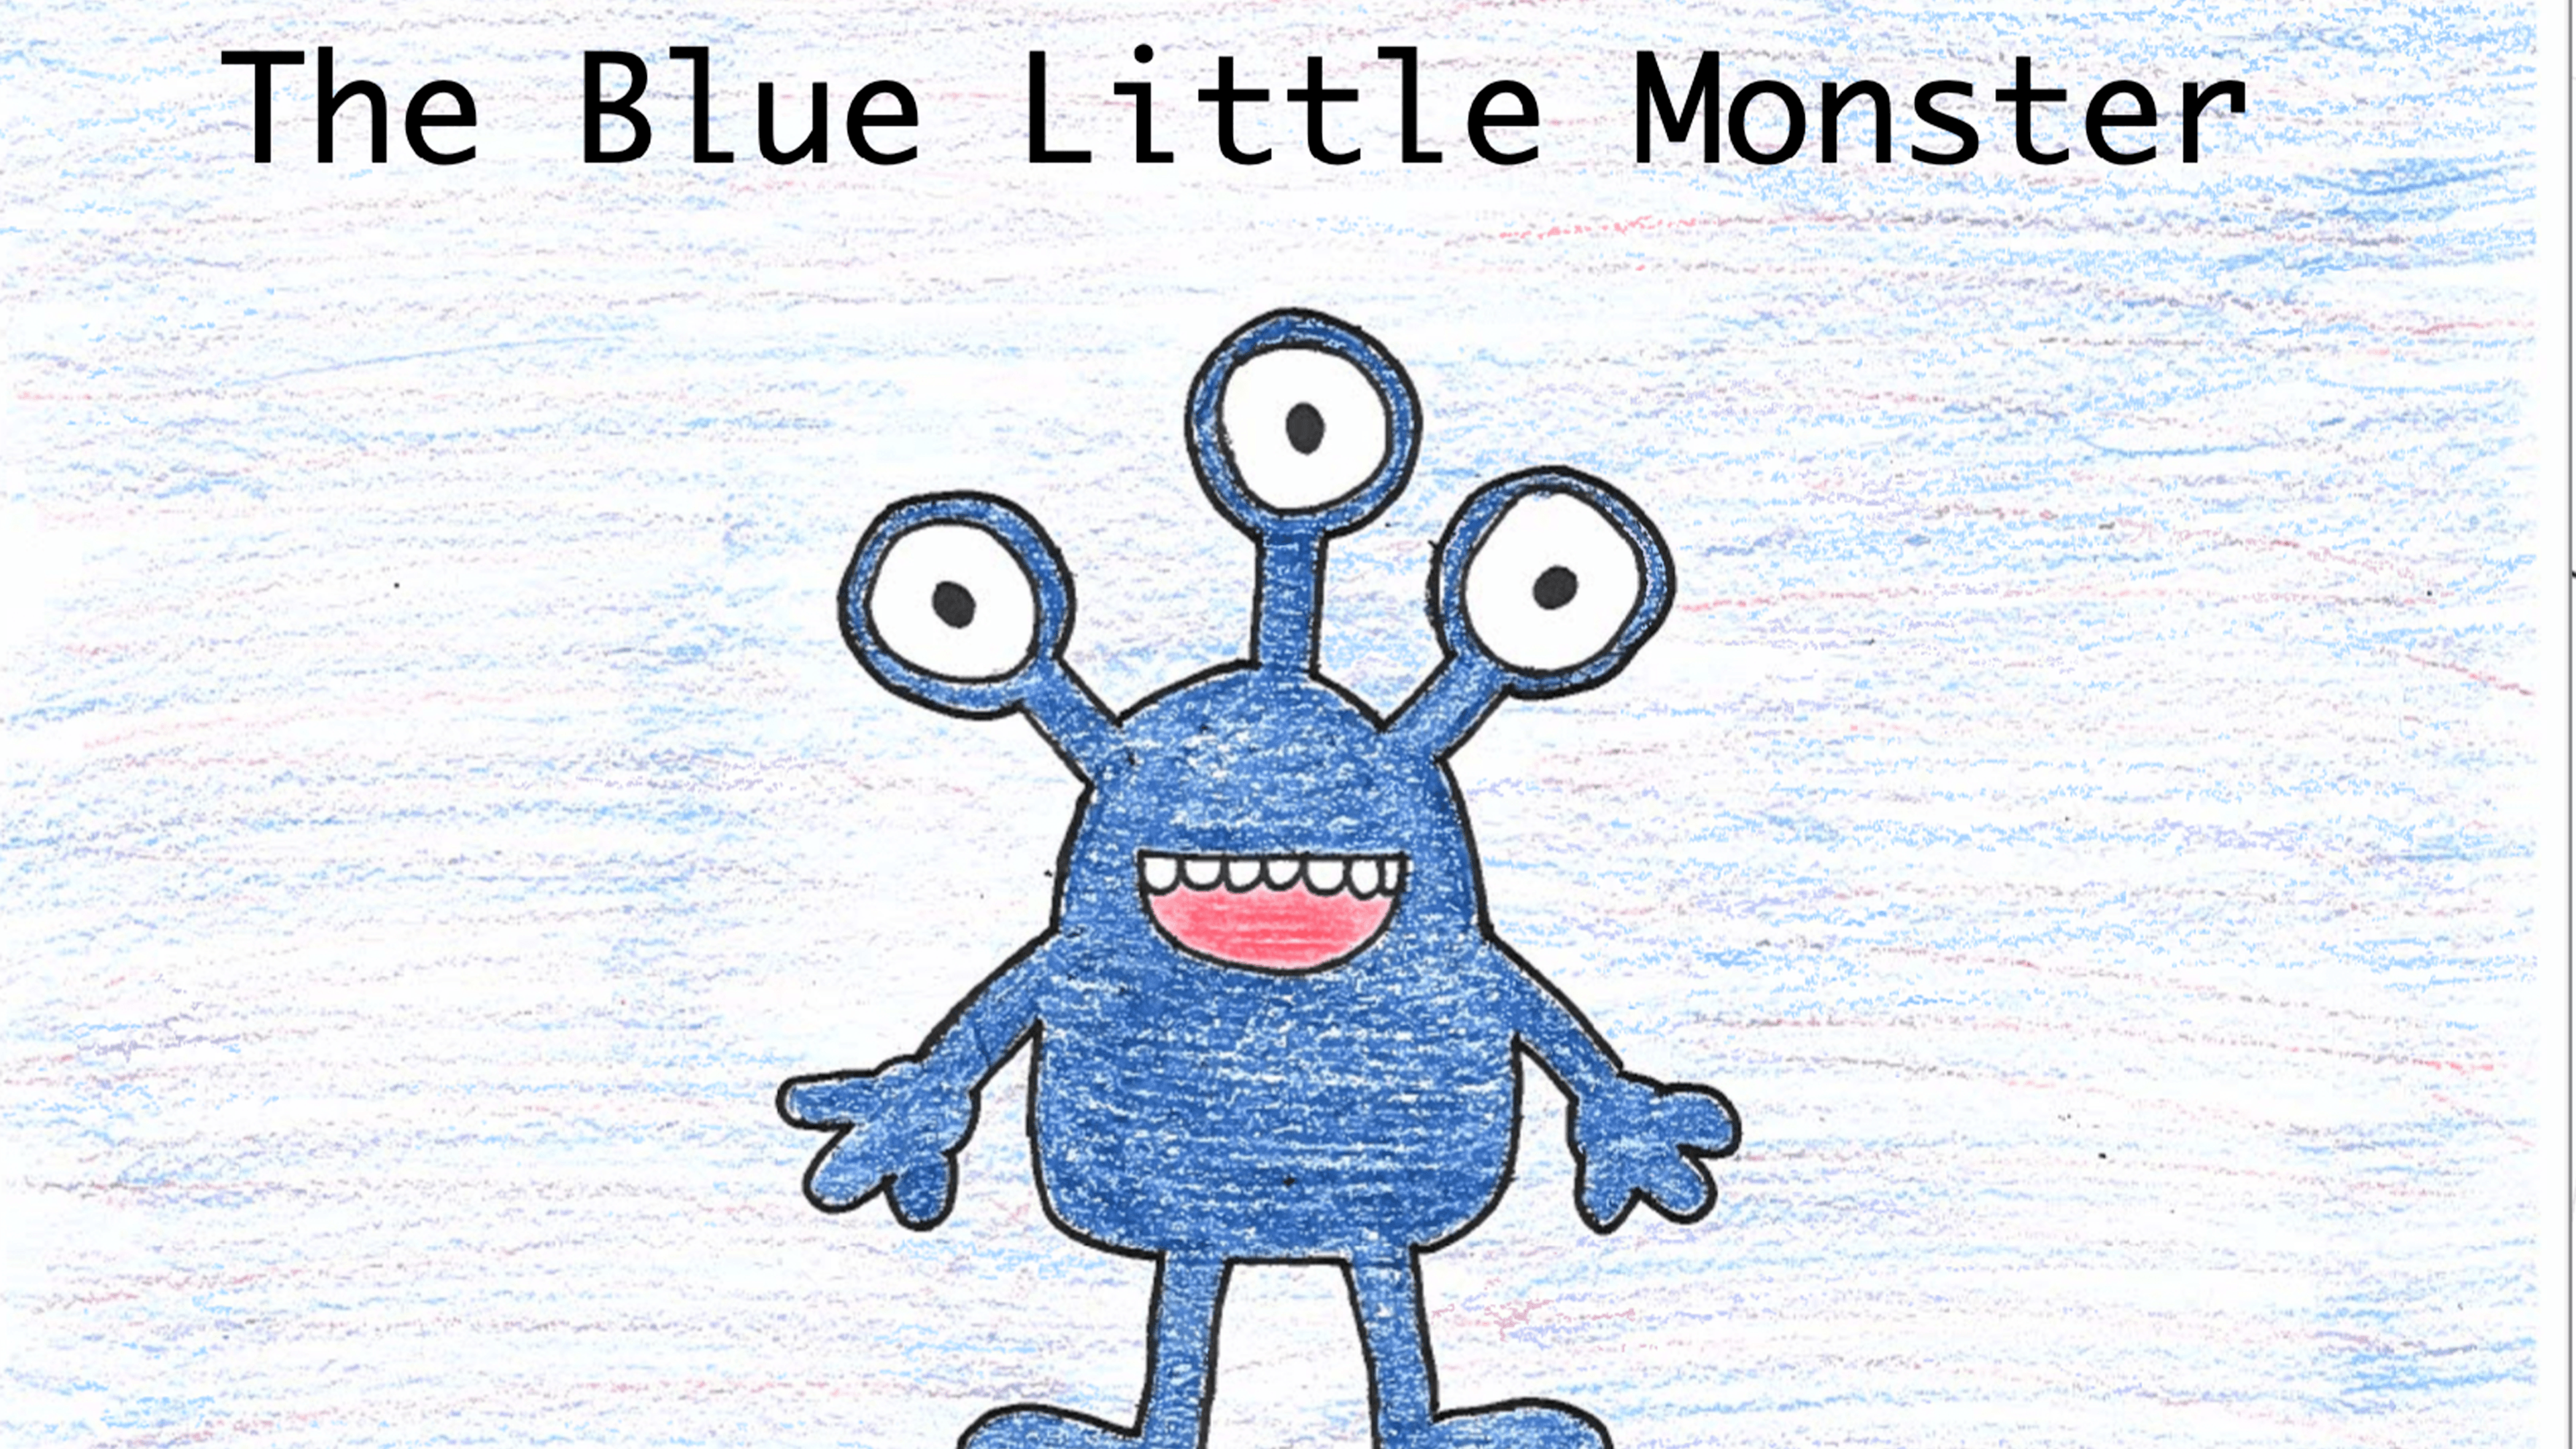 Cover of The Blue Little Monster depicting a drawing of a blue monster with 3 eyes and the text "The Blue Little Monster"